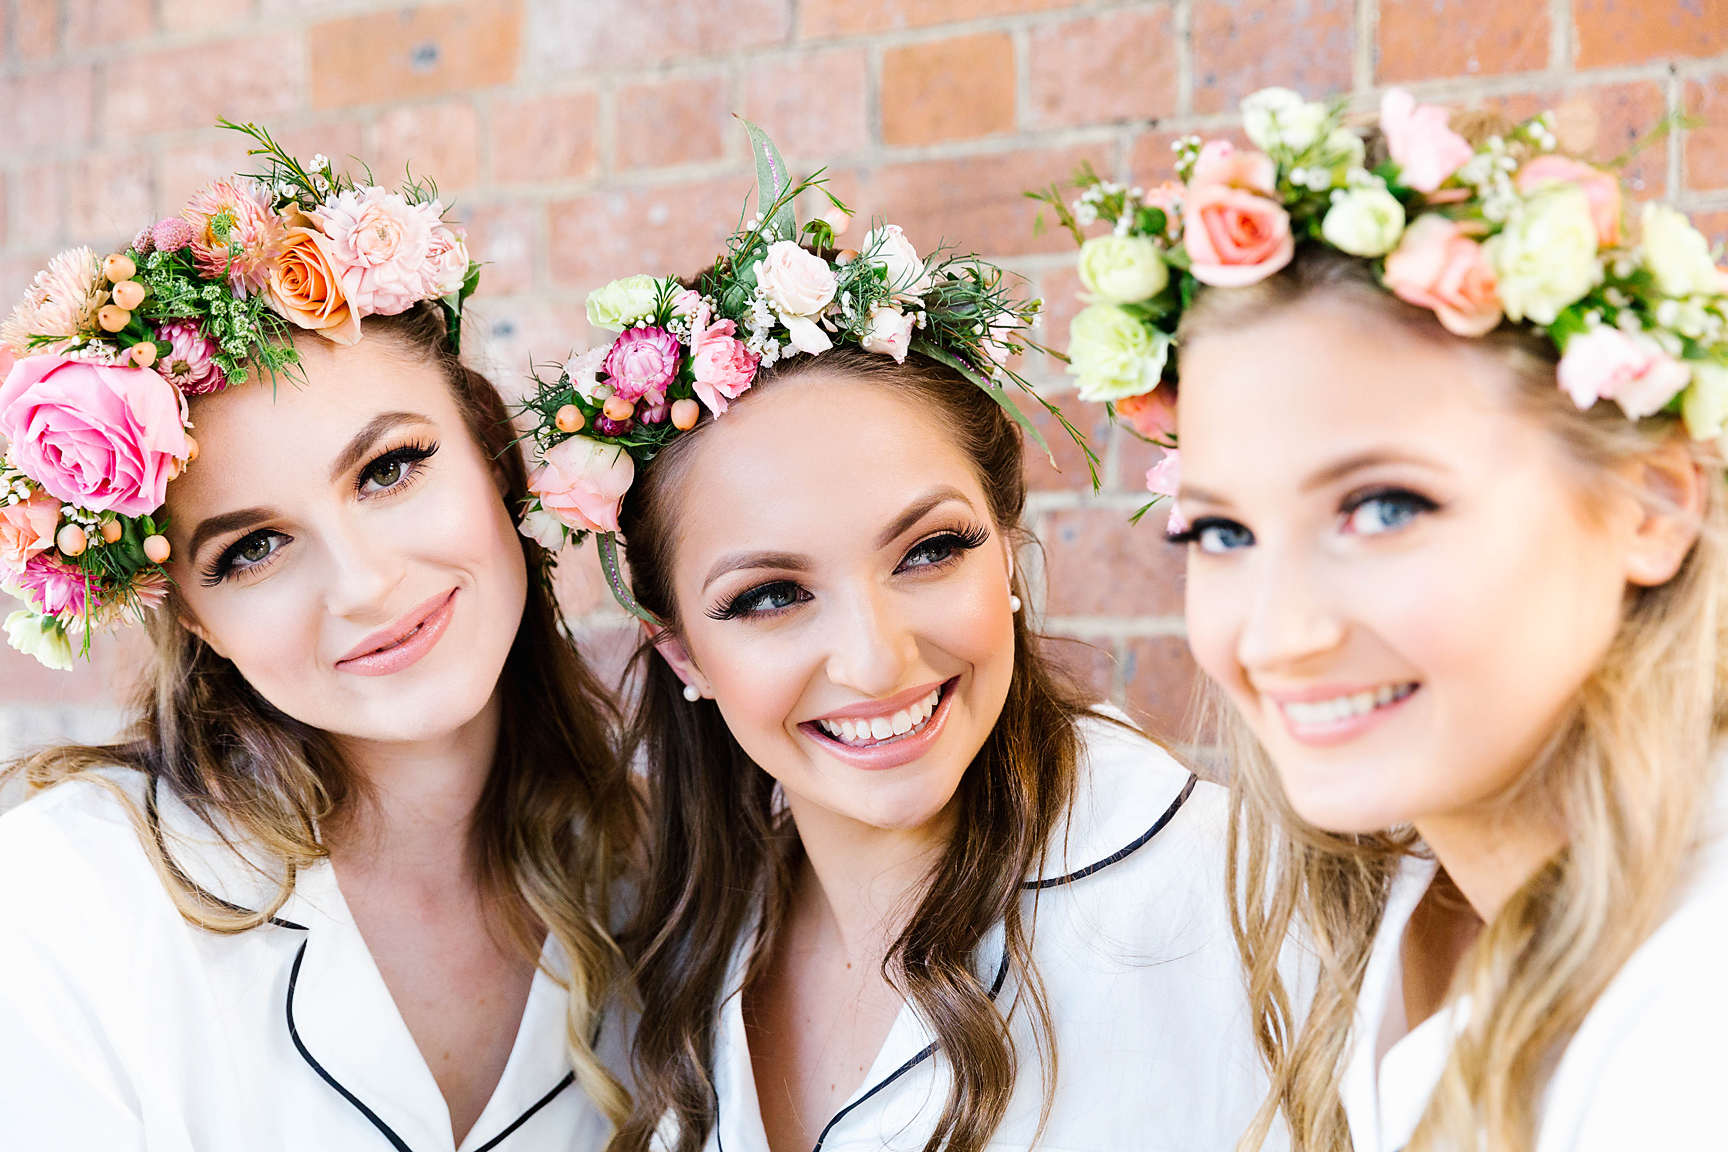 bride to be with her bridesmaids smiling and wearing flower crowns